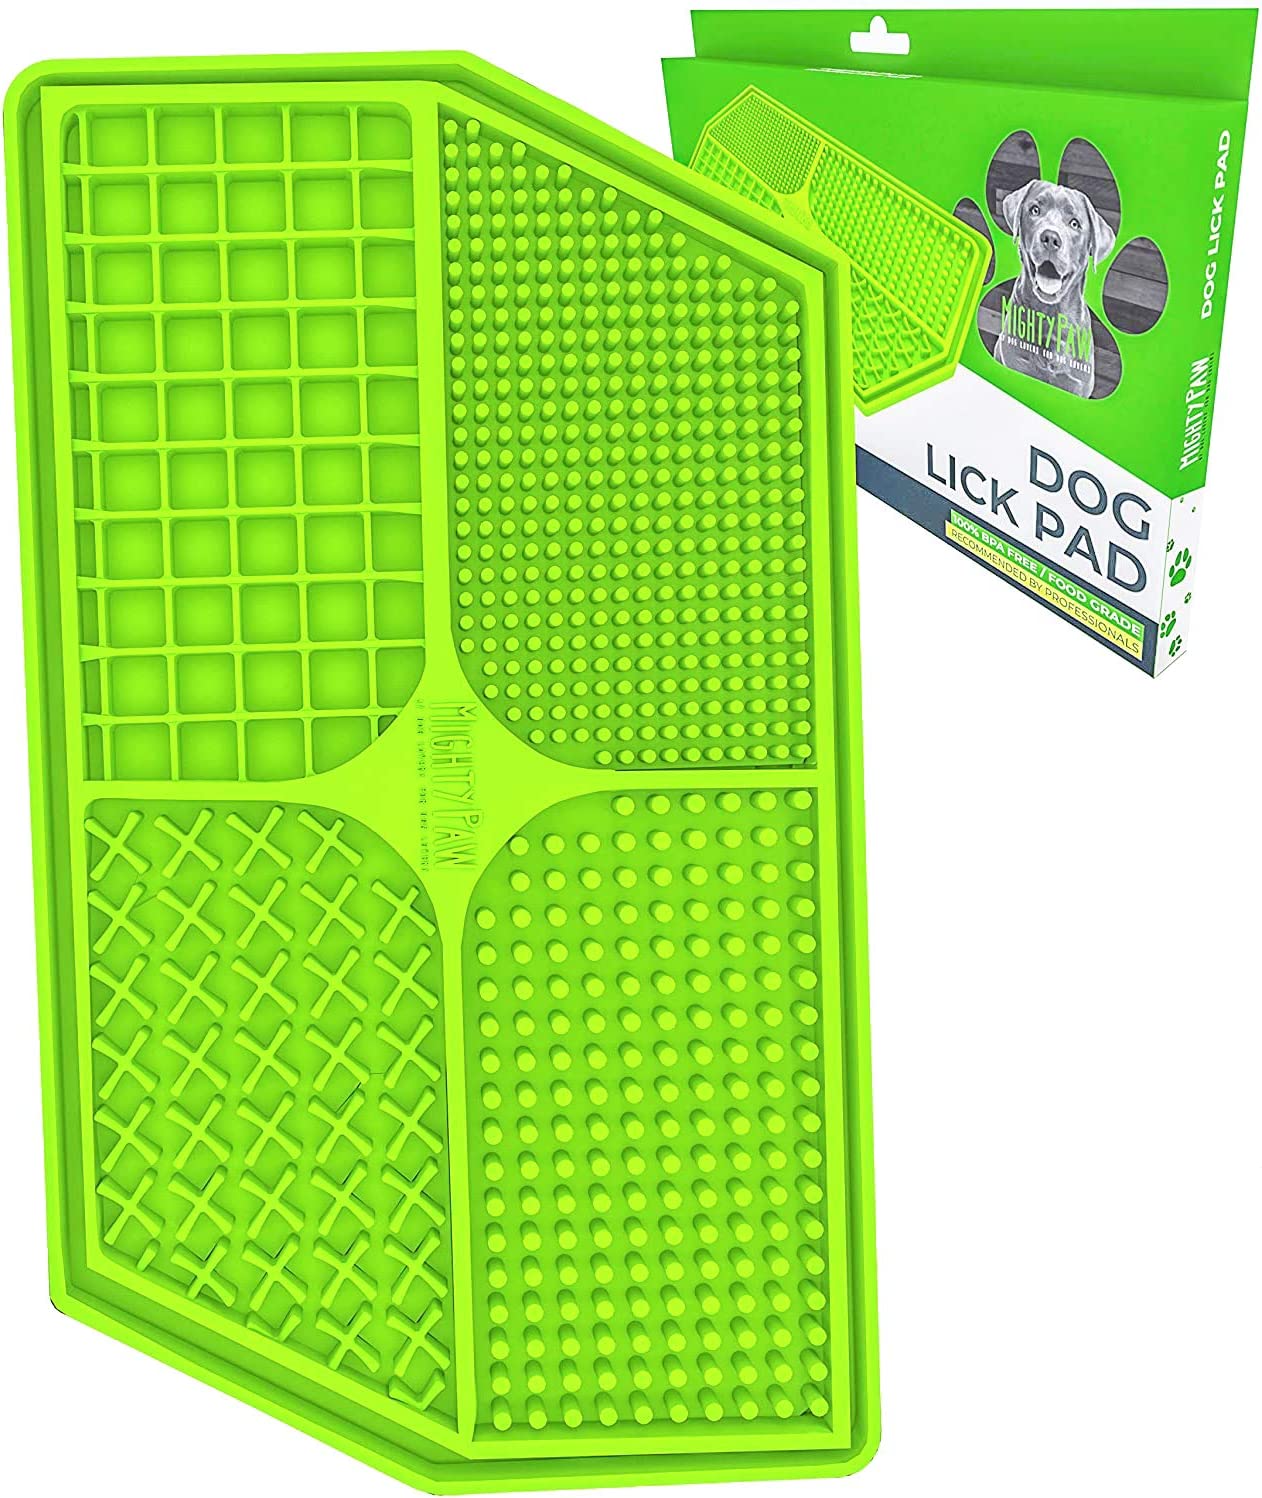 Mighty Paw Dog Lick Pad | BPA-Free Food Grade Silicone Mat for Fun, Anxiety, & Boredom Relief. Strong Suction Cups for Easy Grooming and Slow Feeding. Supports Dental Health. Dishwasher Safe